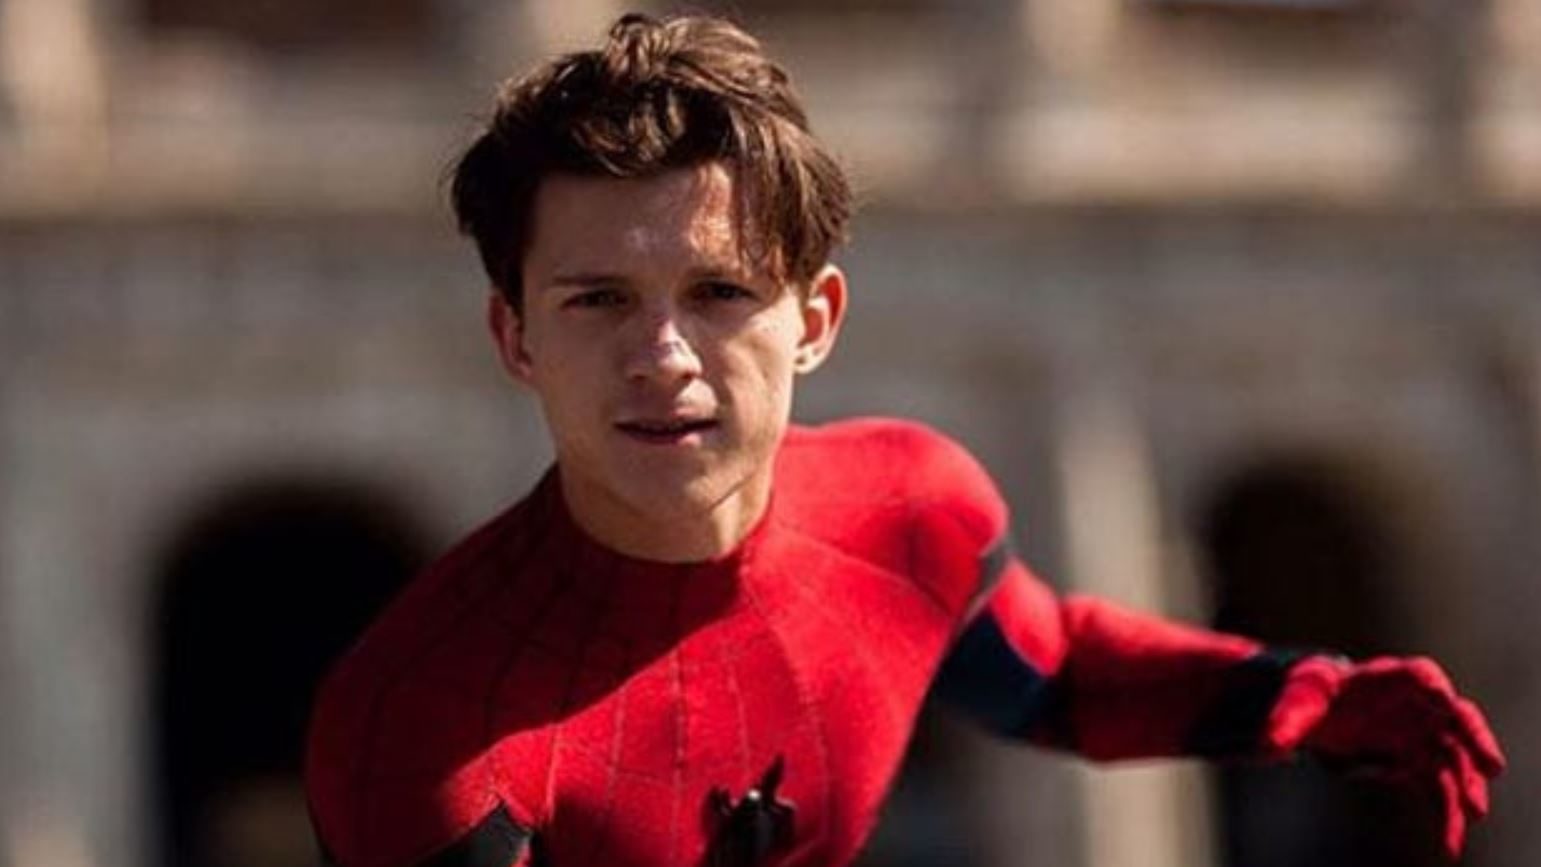 Spider-Man 3 Leaked Spoilers hints on New Villain, Plot Details and Possible Cameos Revealed